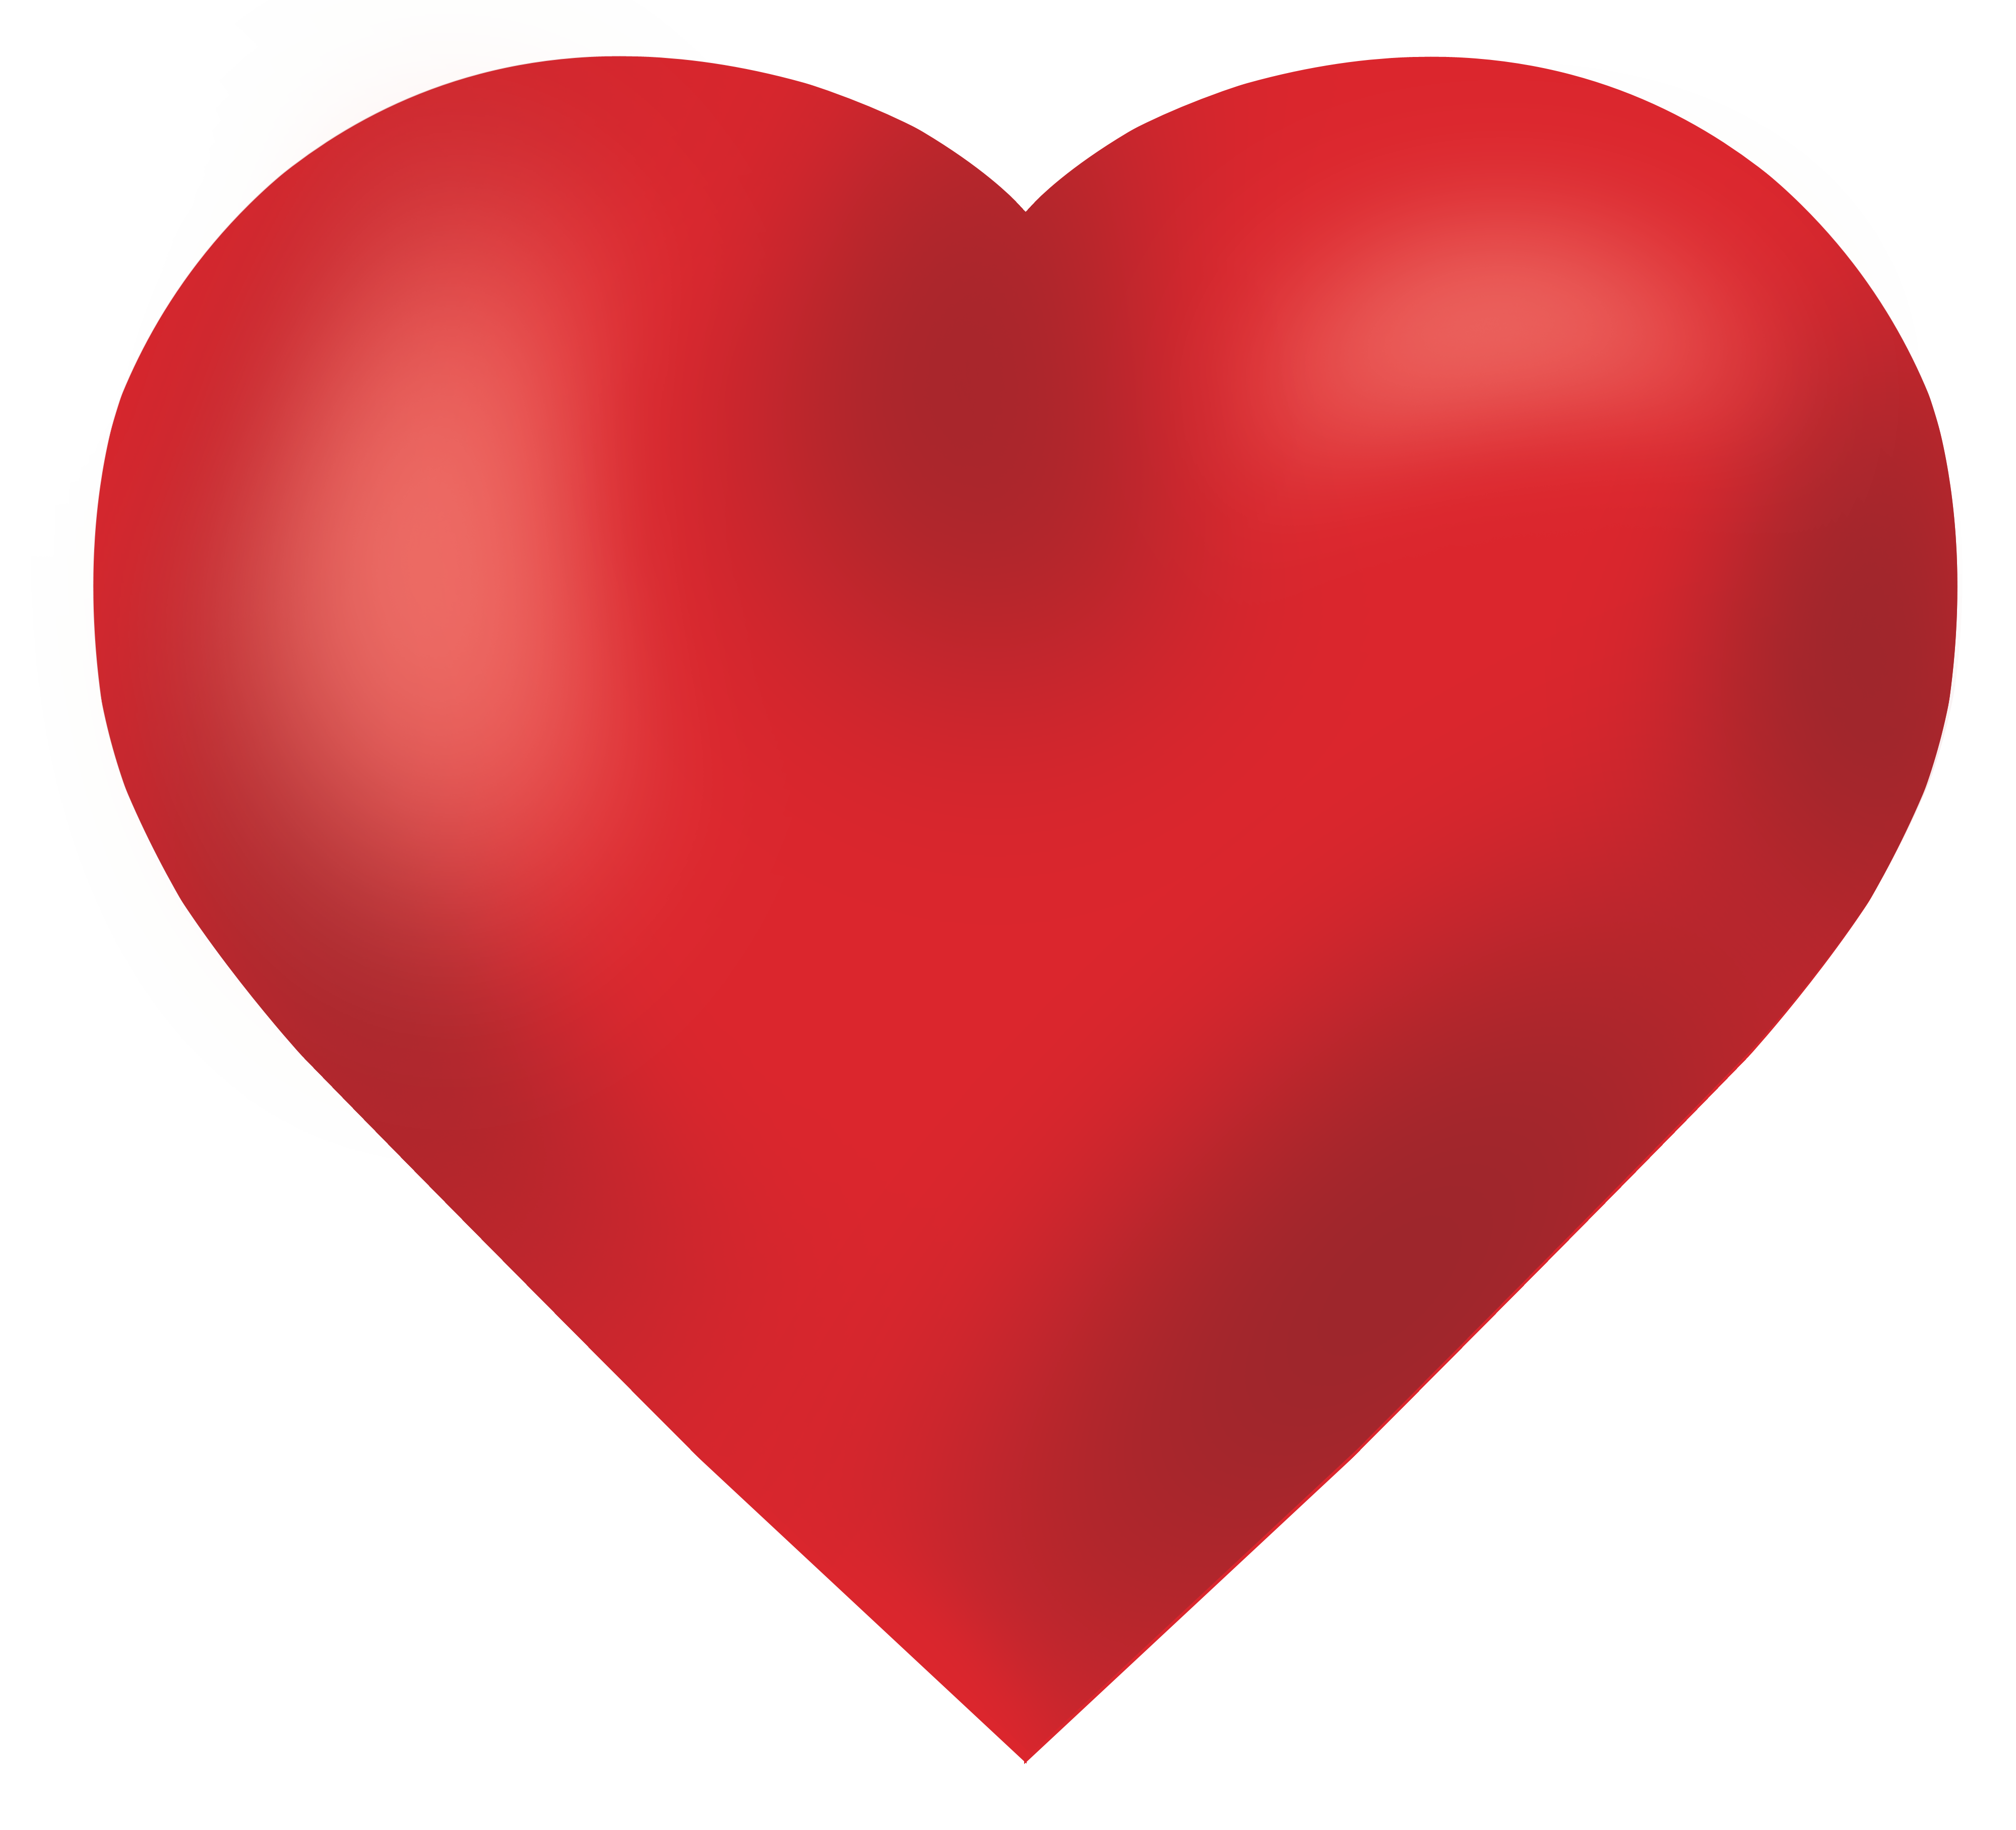 Transparent pictures free icons. Heart images png